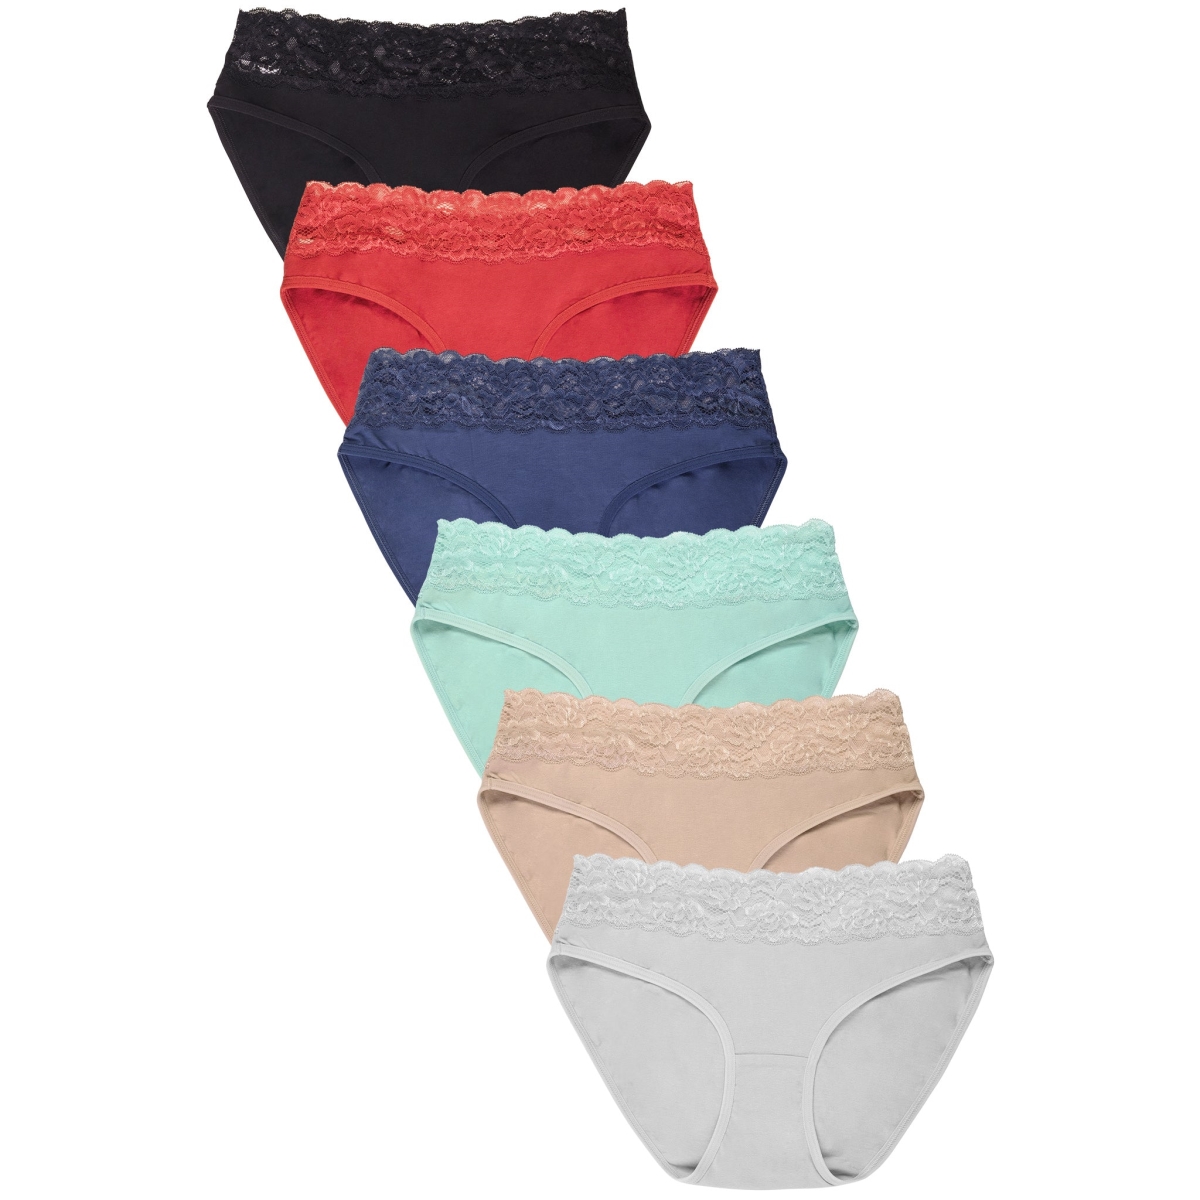 Picture of 247 Frenzy 247-LP1394CK3-MD Womens Essentials Cotton Stretch Bikini Panty Underwear - Assorted Color - Medium - Pack of 6